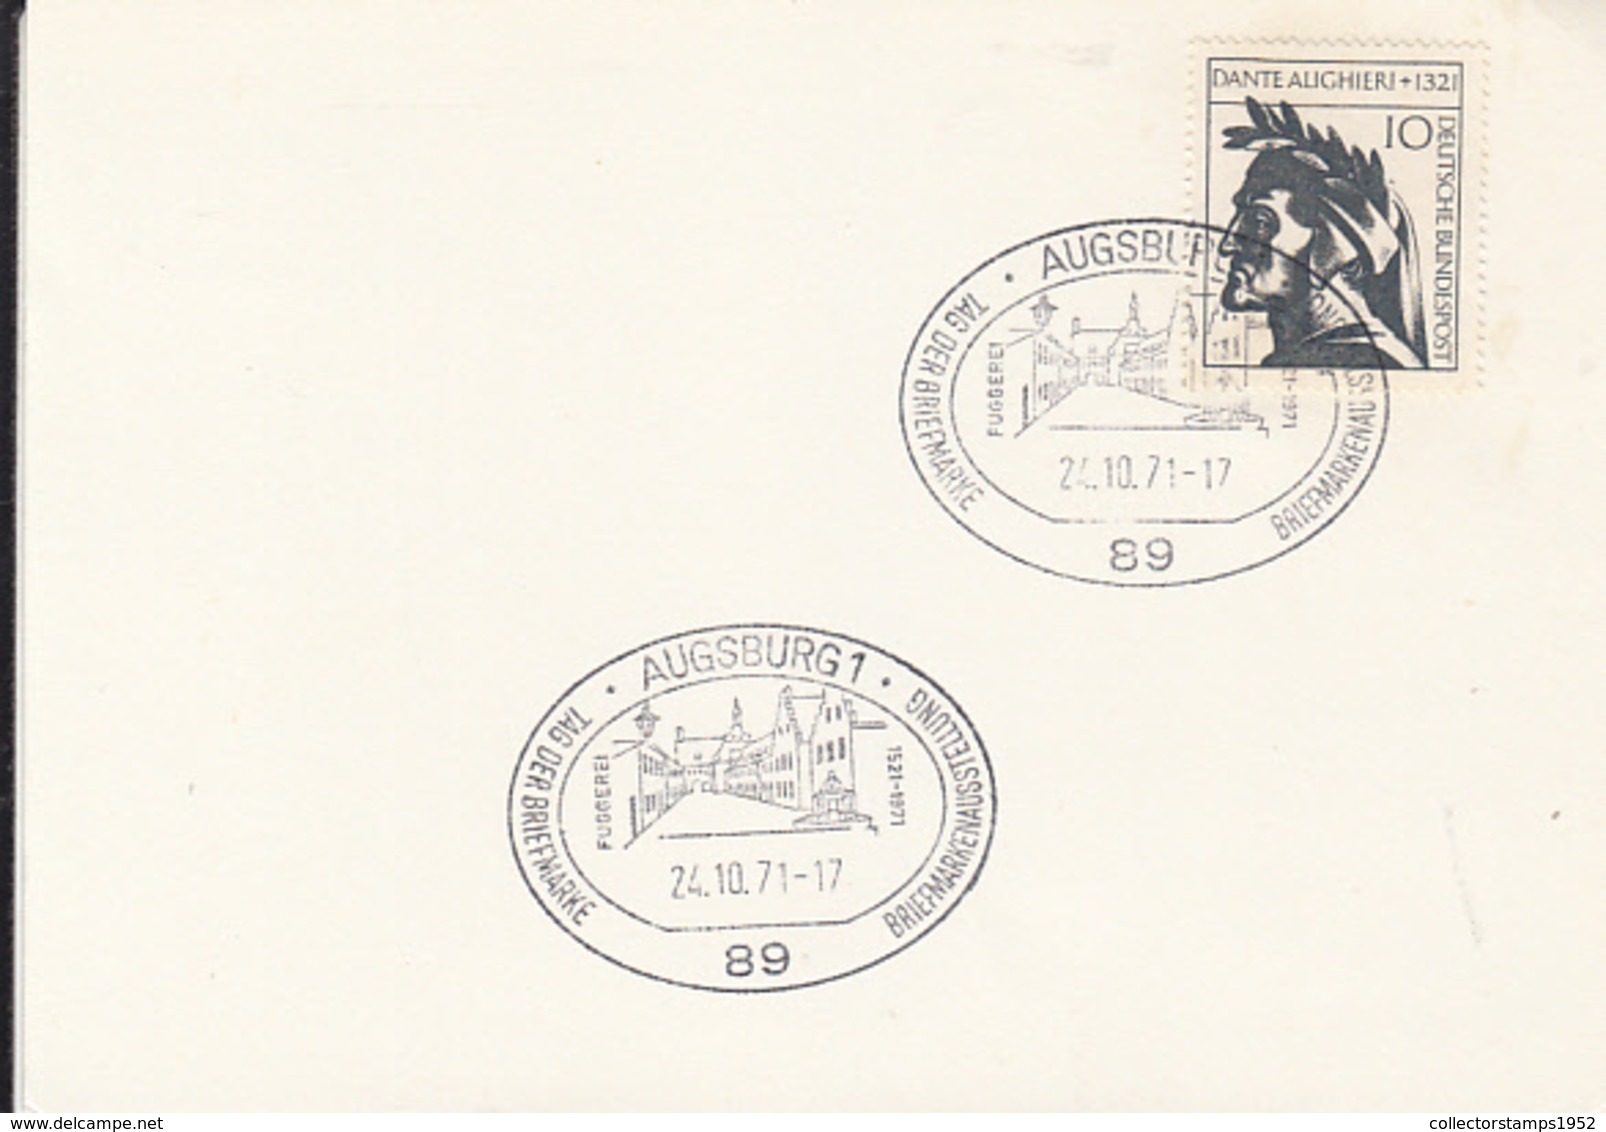 83671- AUGSBURG PHILATELIC EXHIBITION SPECIAL POSTMARK ON THICK PAPER, DANTE ALIGHIERI STAMP, 1971, WEST GERMANY - Covers & Documents